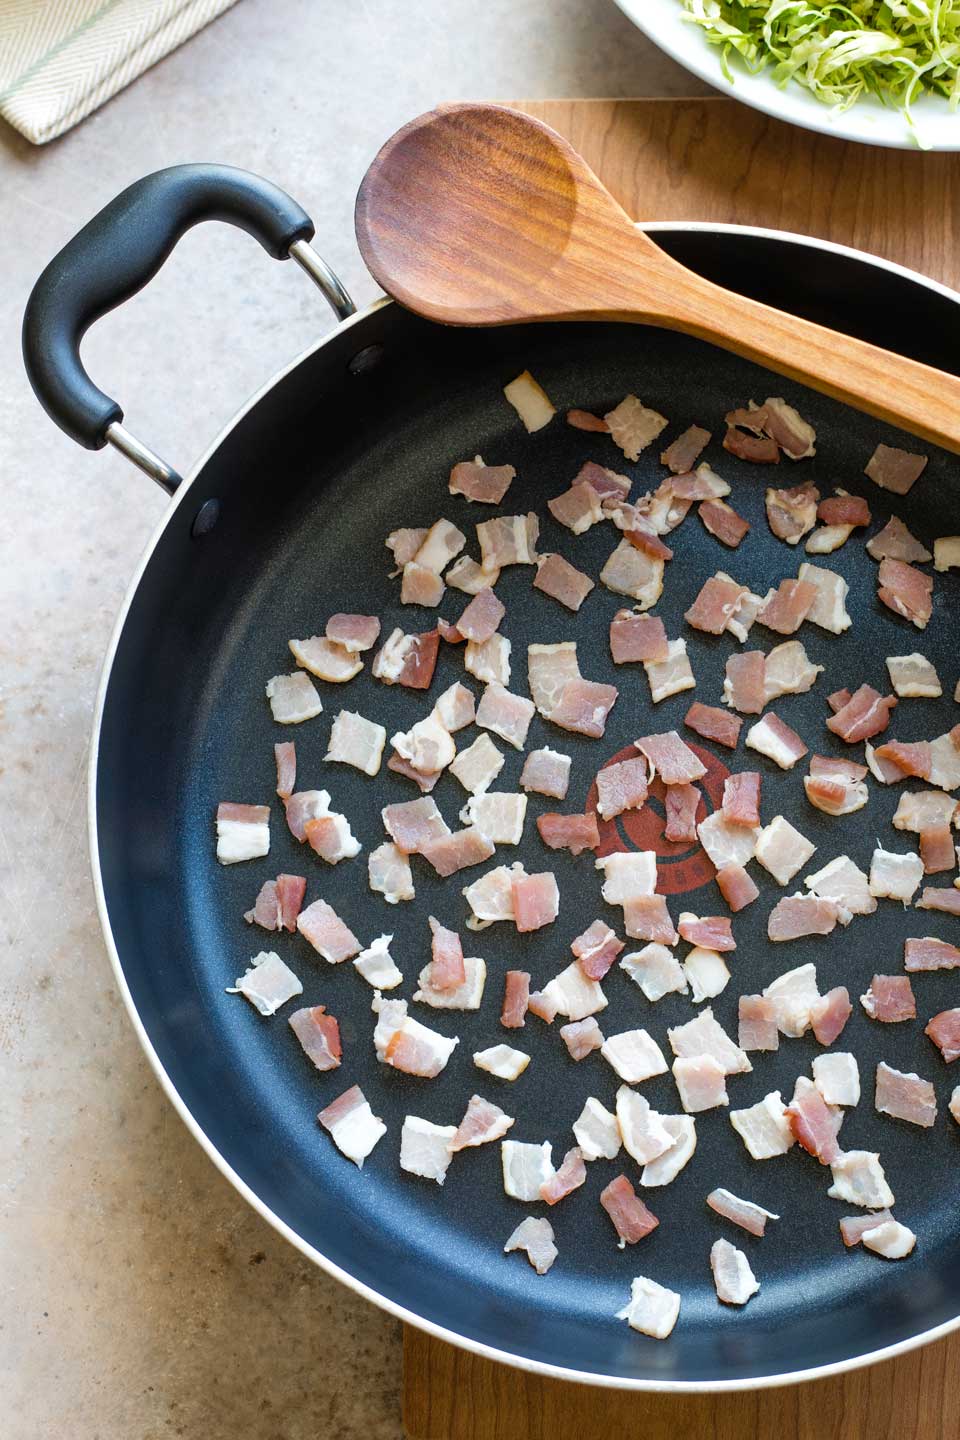 Diced bacon in pan before being sauteed.